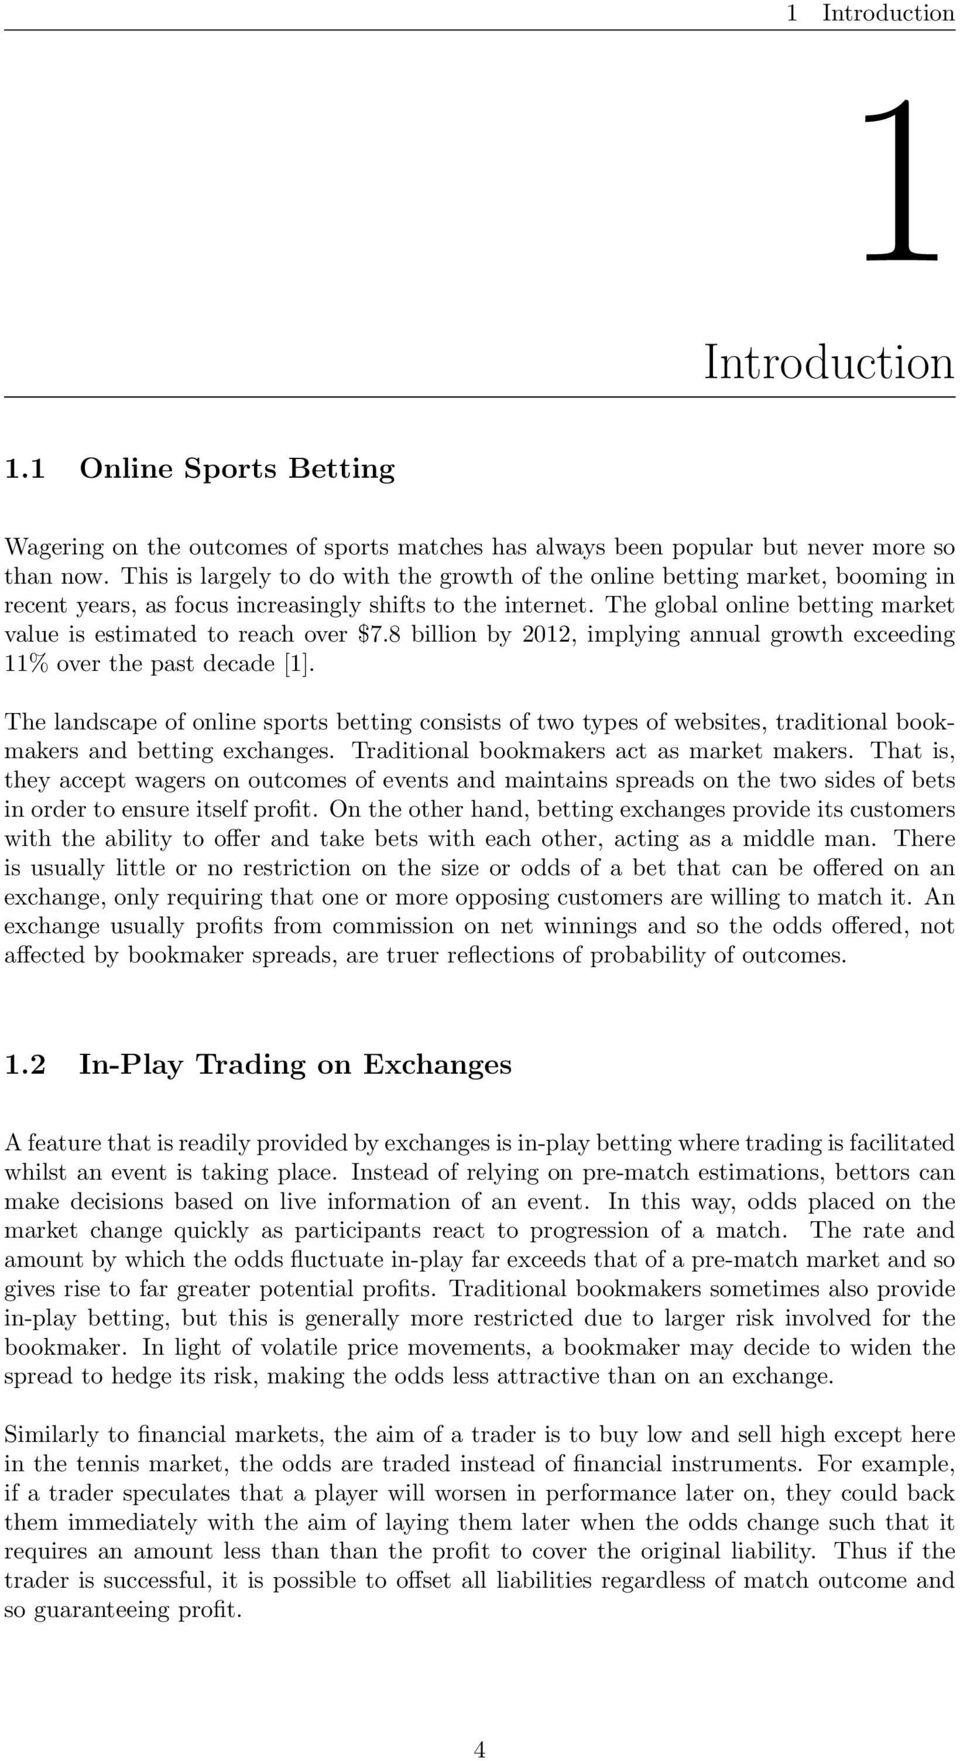 The global online betting market value is estimated to reach over $7.8 billion by 2012, implying annual growth exceeding 11% over the past decade [1].